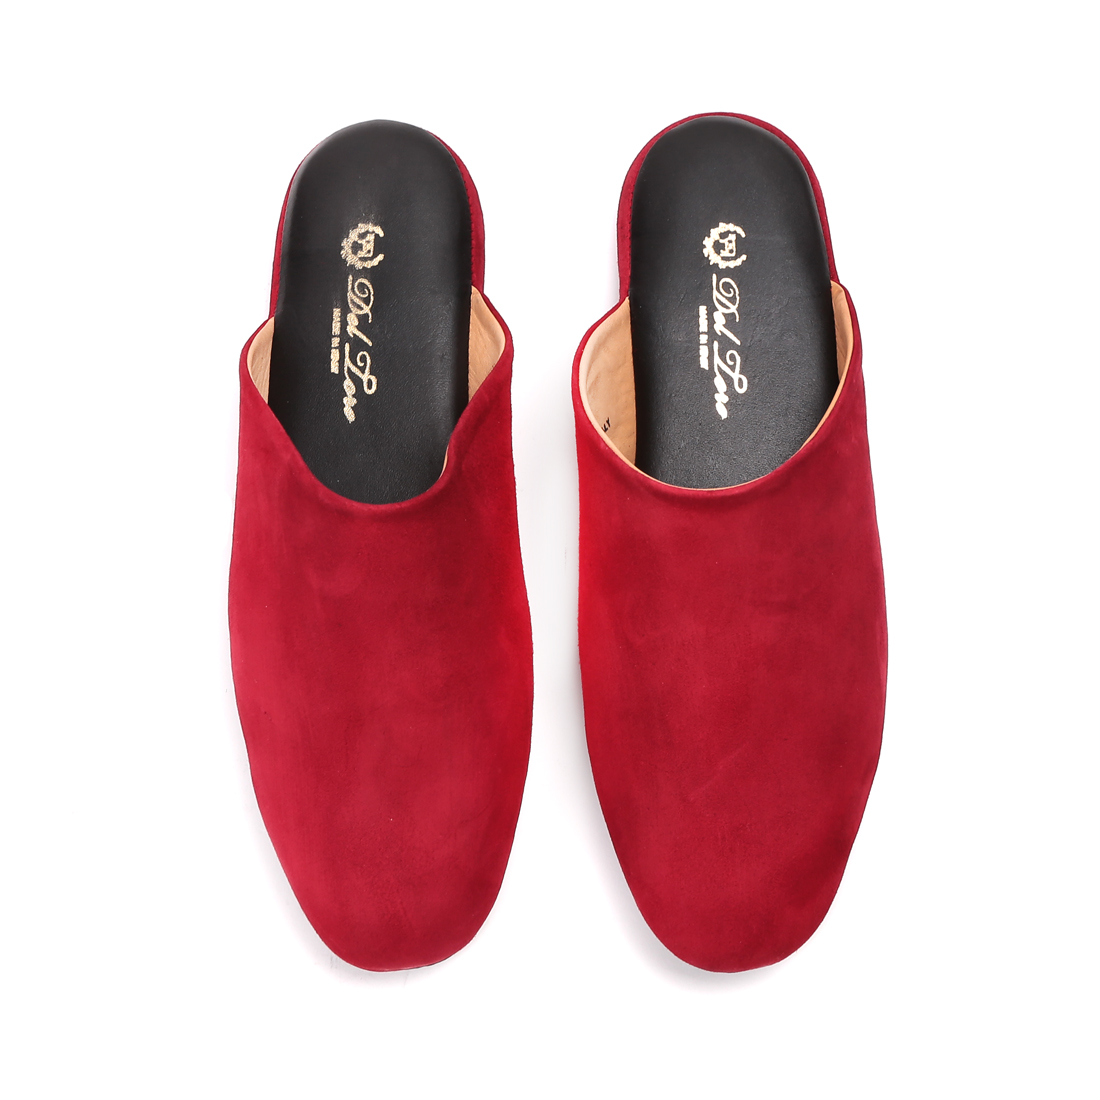 The Pampered Fellow: Del Toro Shoes Suede House Slippers | SHOEOGRAPHY